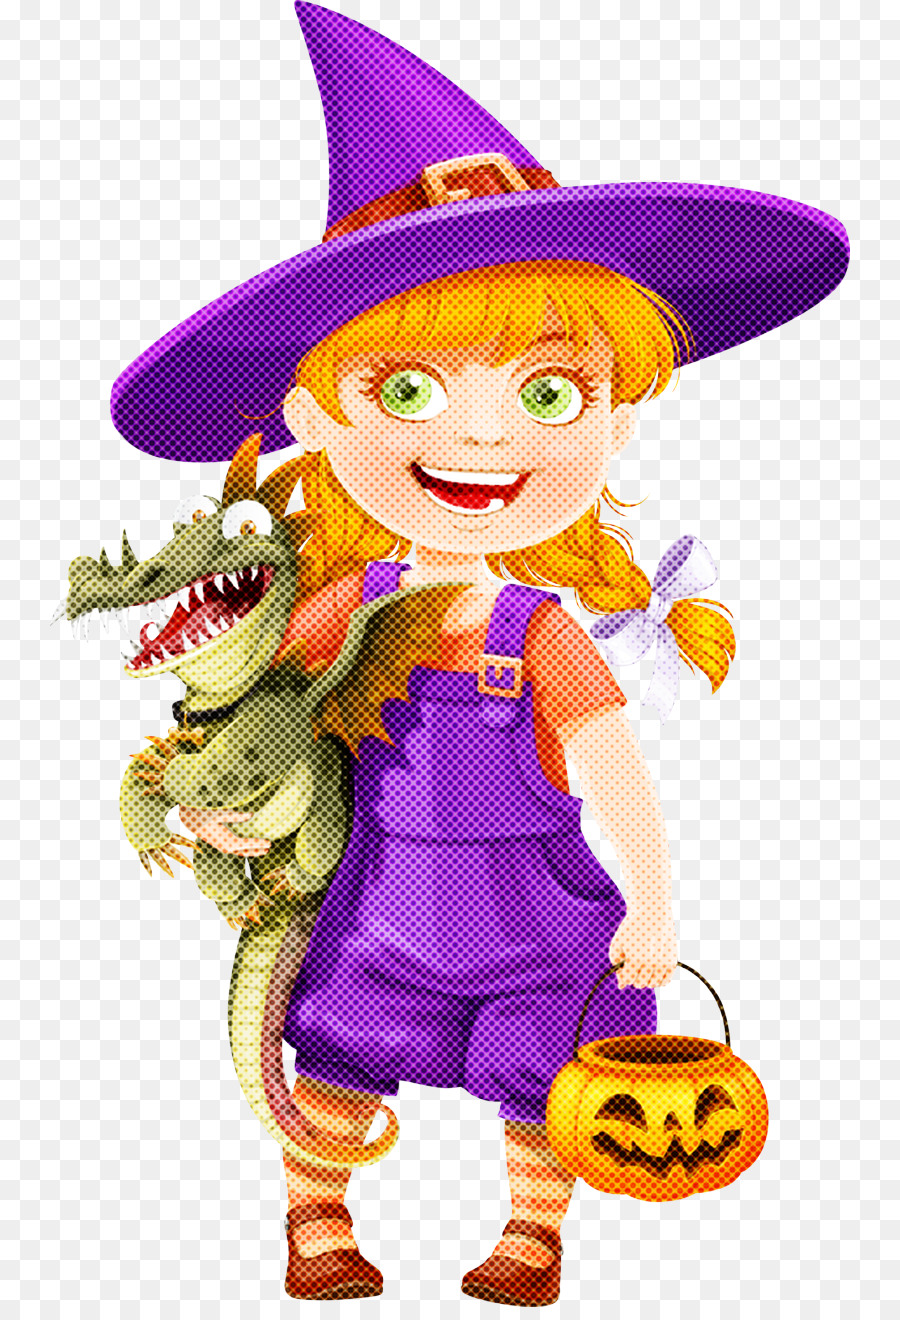 cartoon smile jester witch hat costume